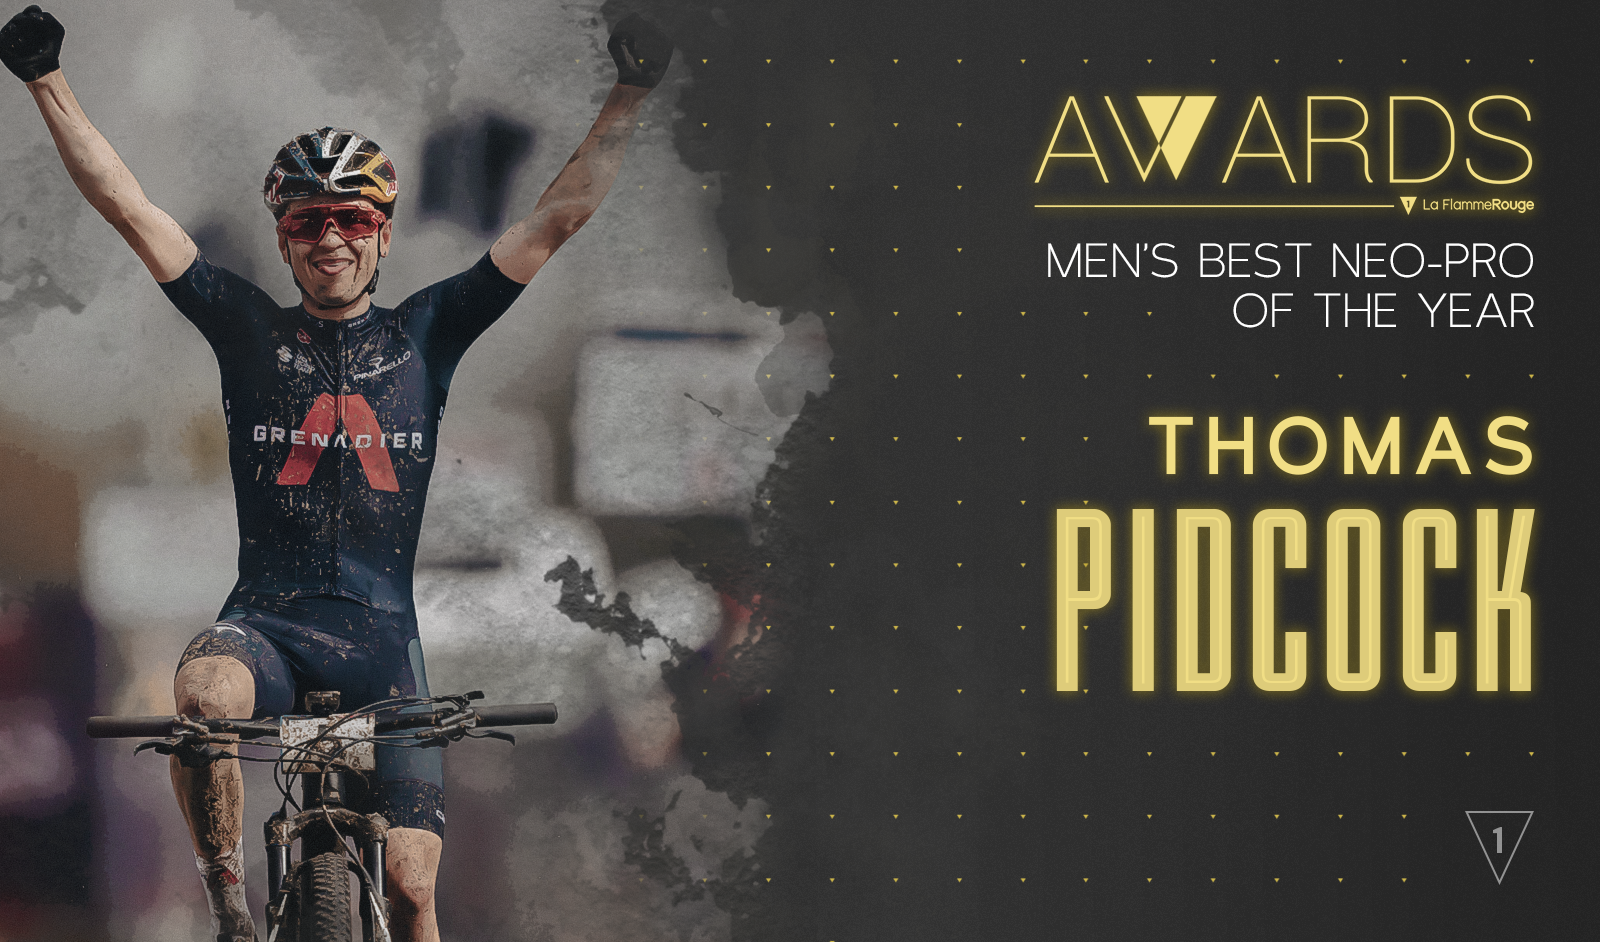 Men’s best neo-pro of the year